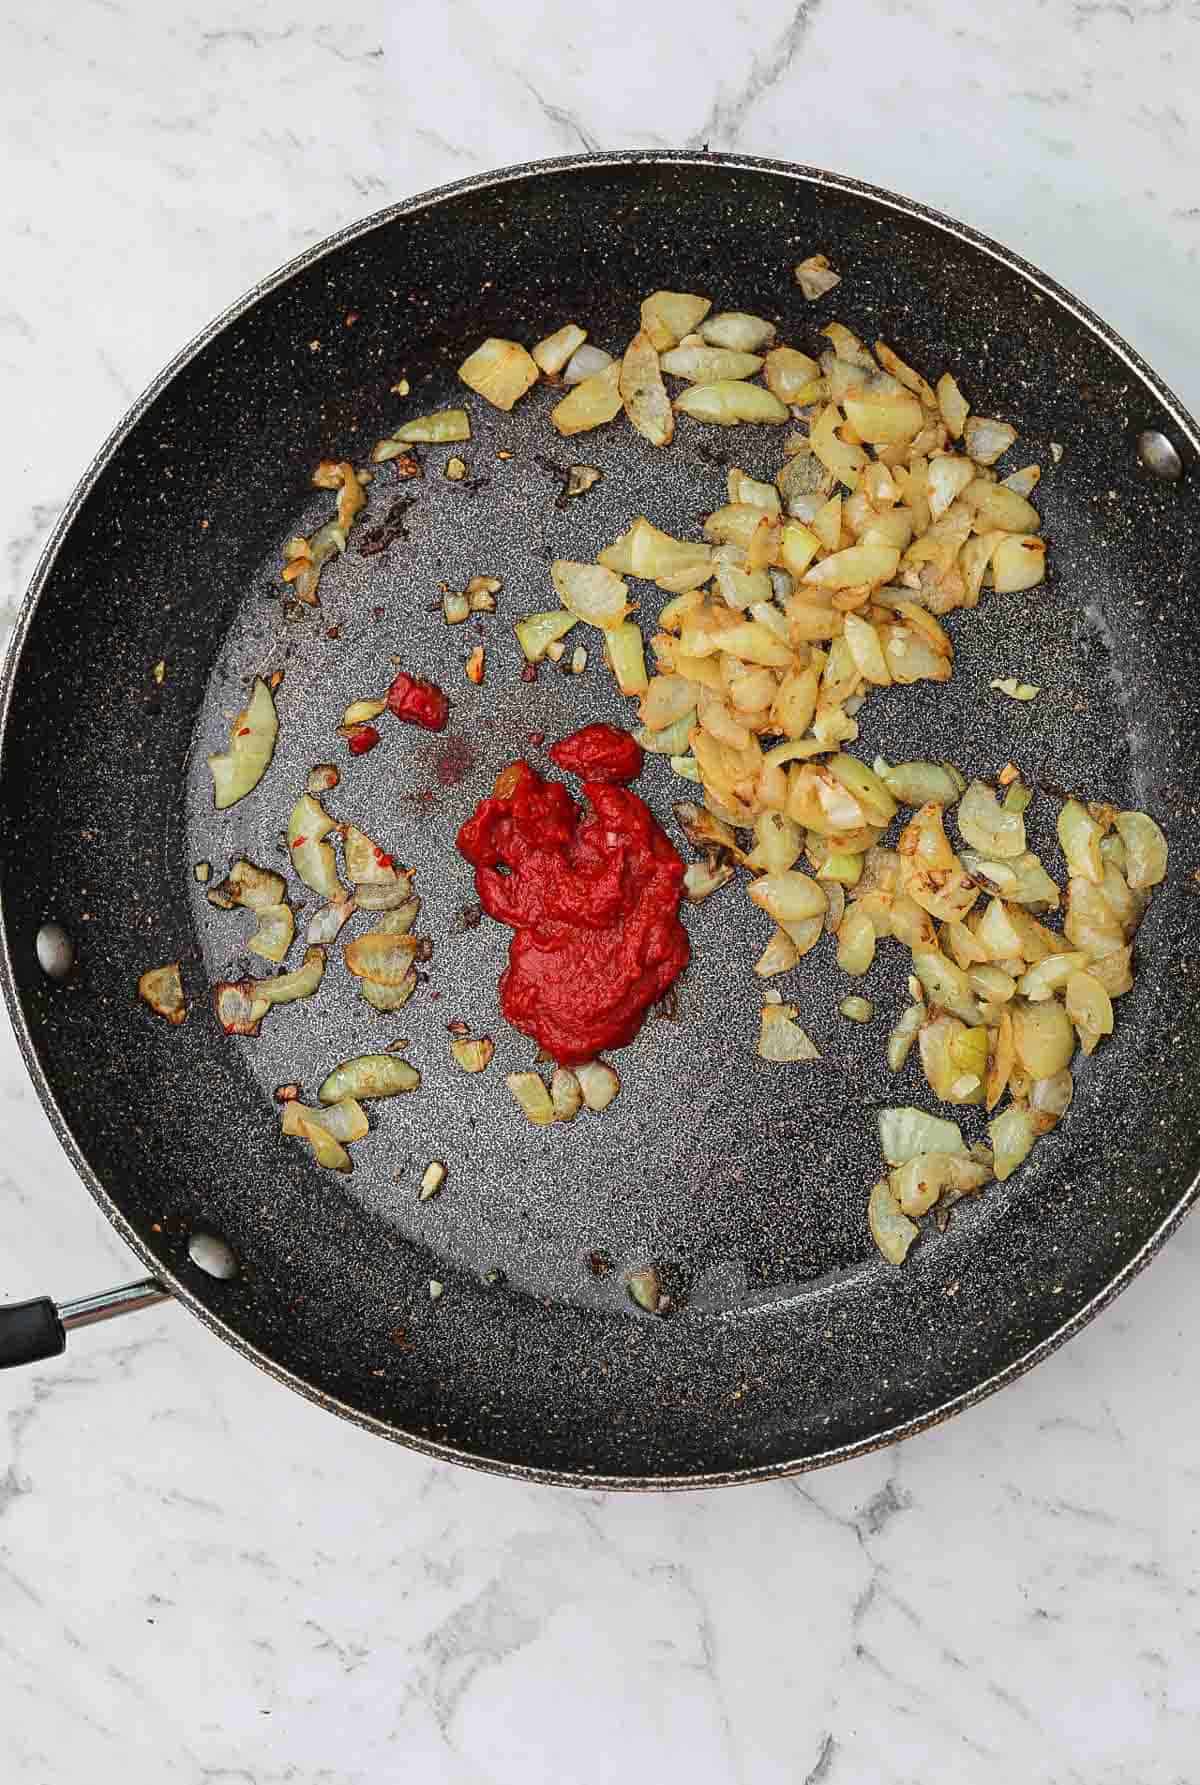 sauteed onions, garlic and tomato paste in the skillet.